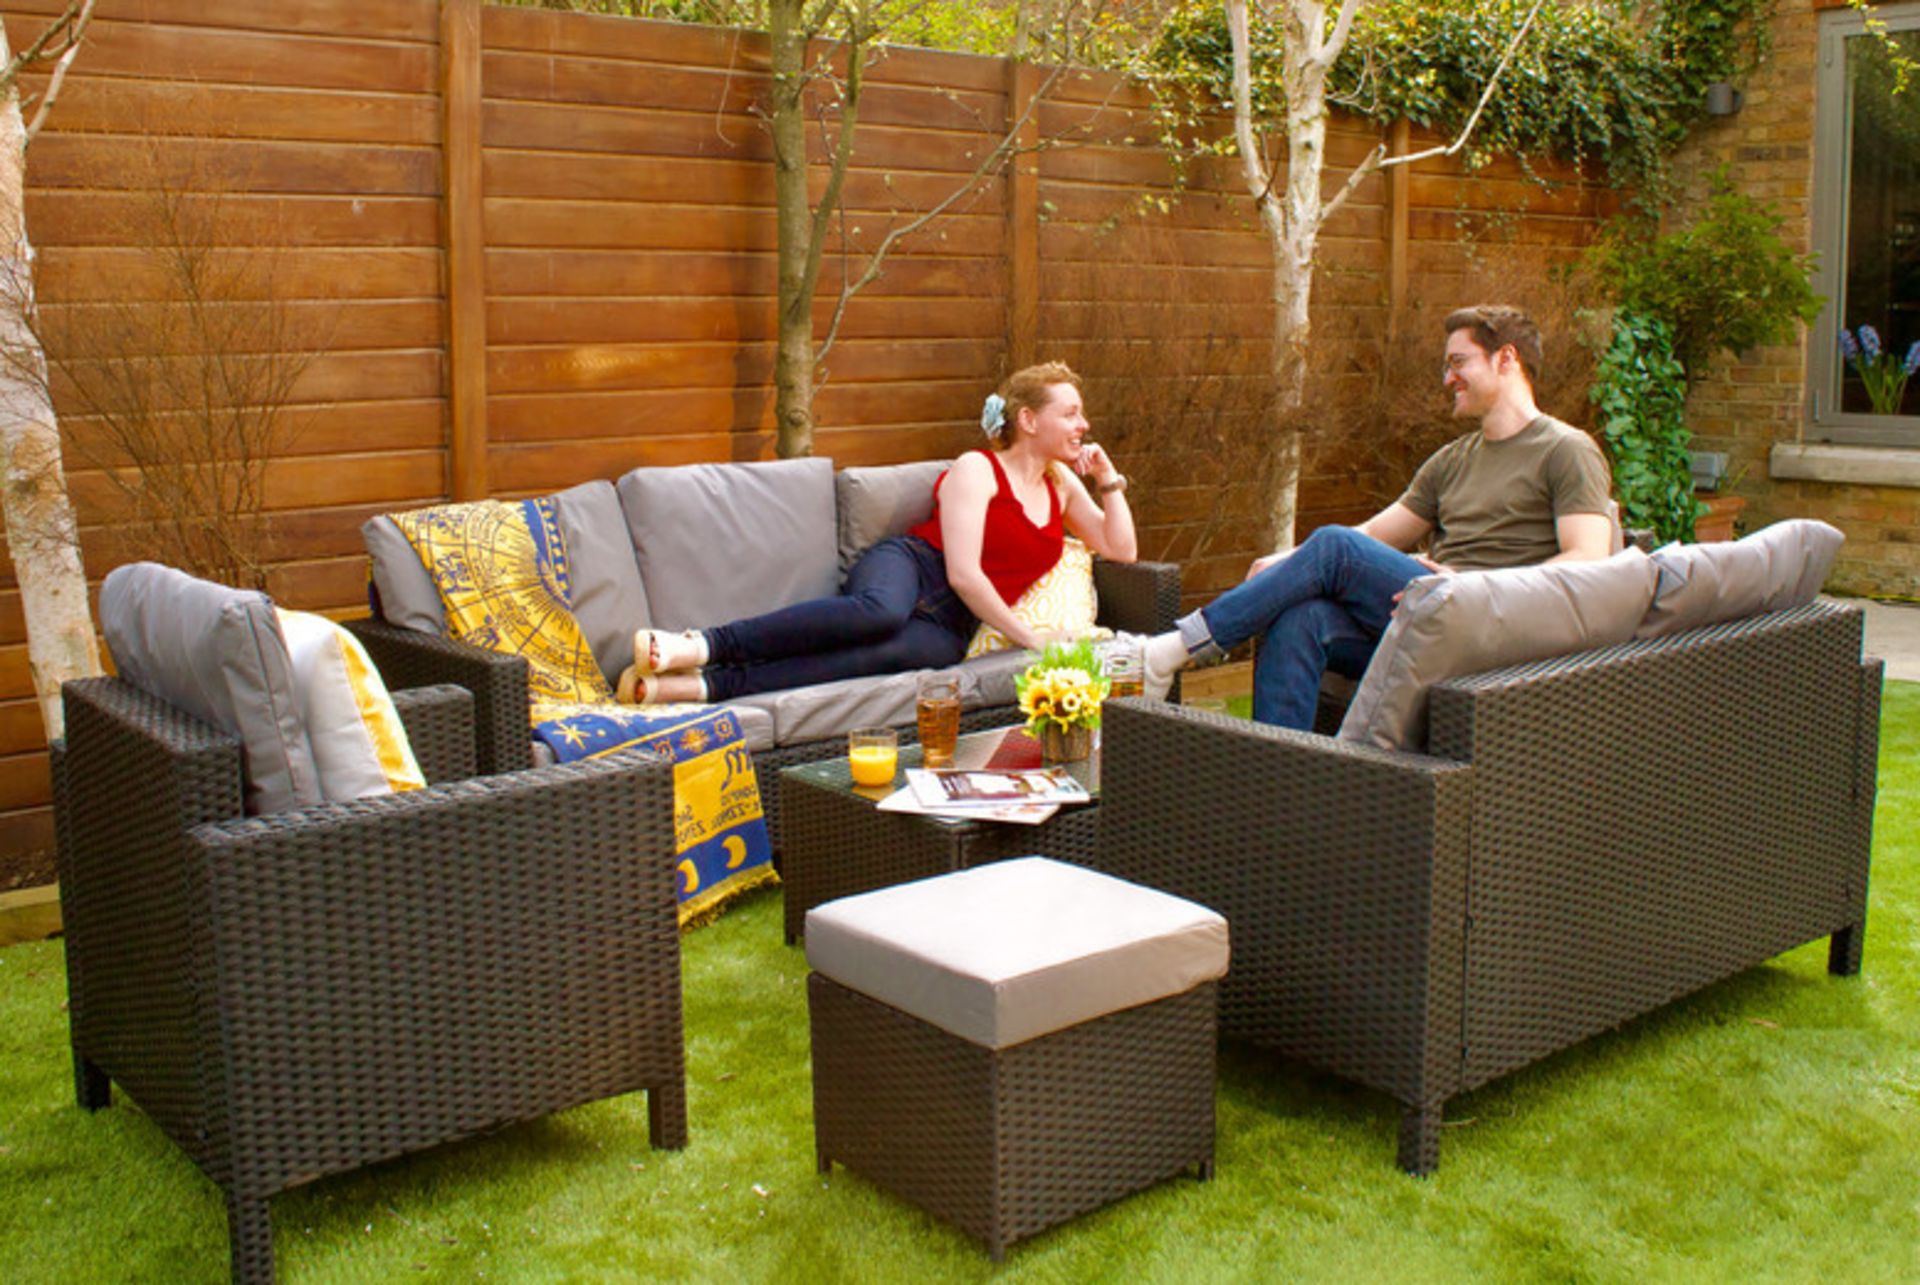 40 SETS (FULL TRUCKLOAD) X NEW 8-SEATER RATTAN CHAIR & SOFA GARDEN FURNITURE SET - MIXED COLOUR.